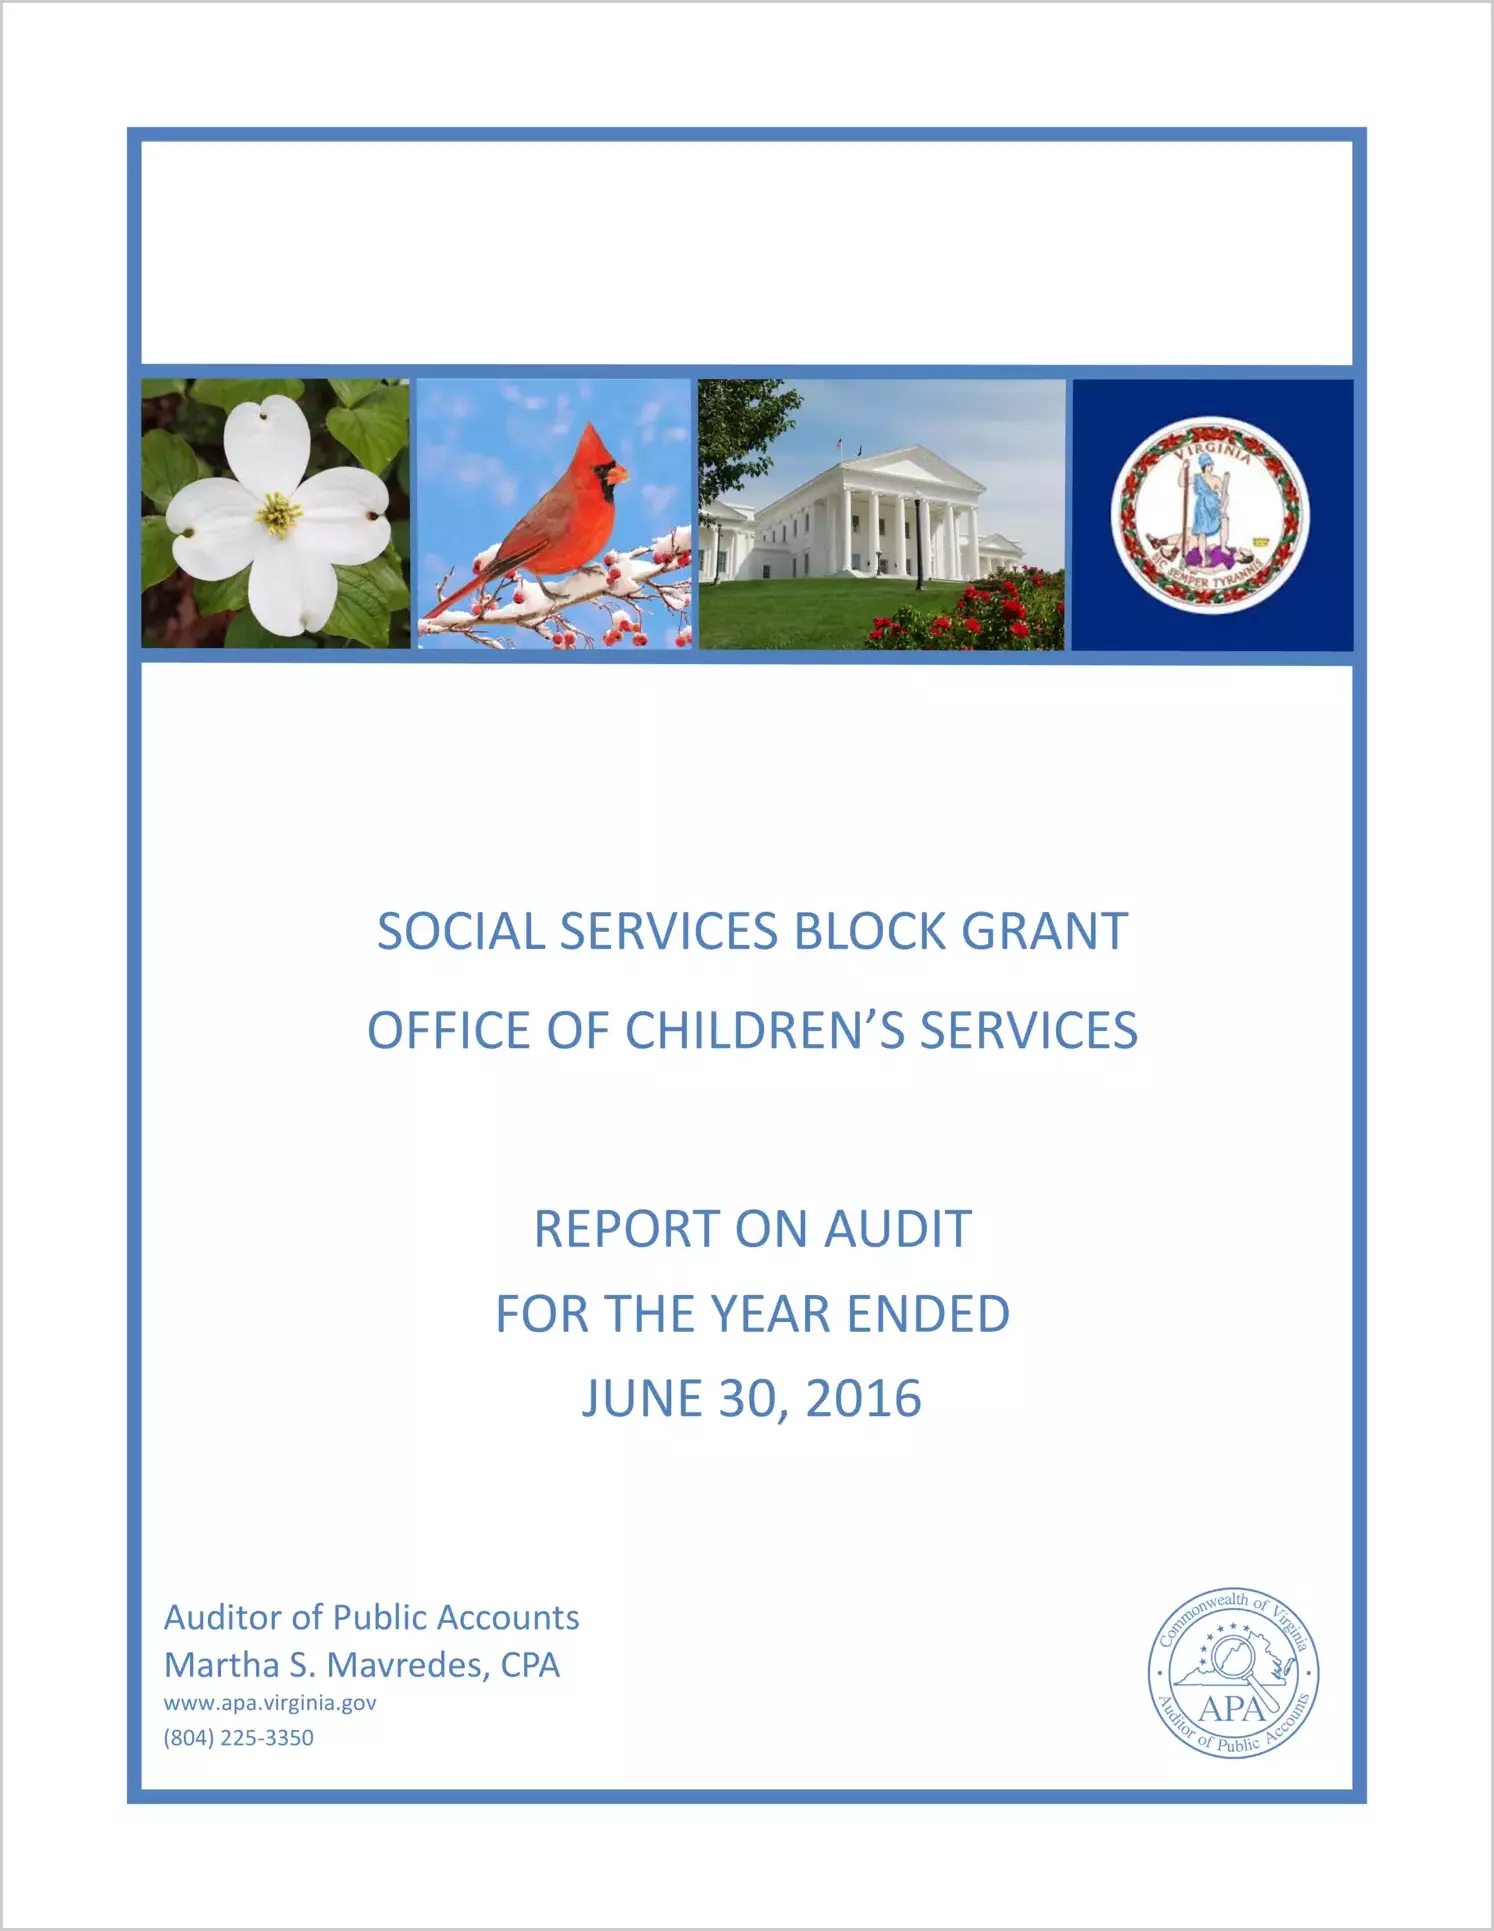 Social Services Block Grant Office of Children's Services Report on Audit for the year ended June 30, 2016